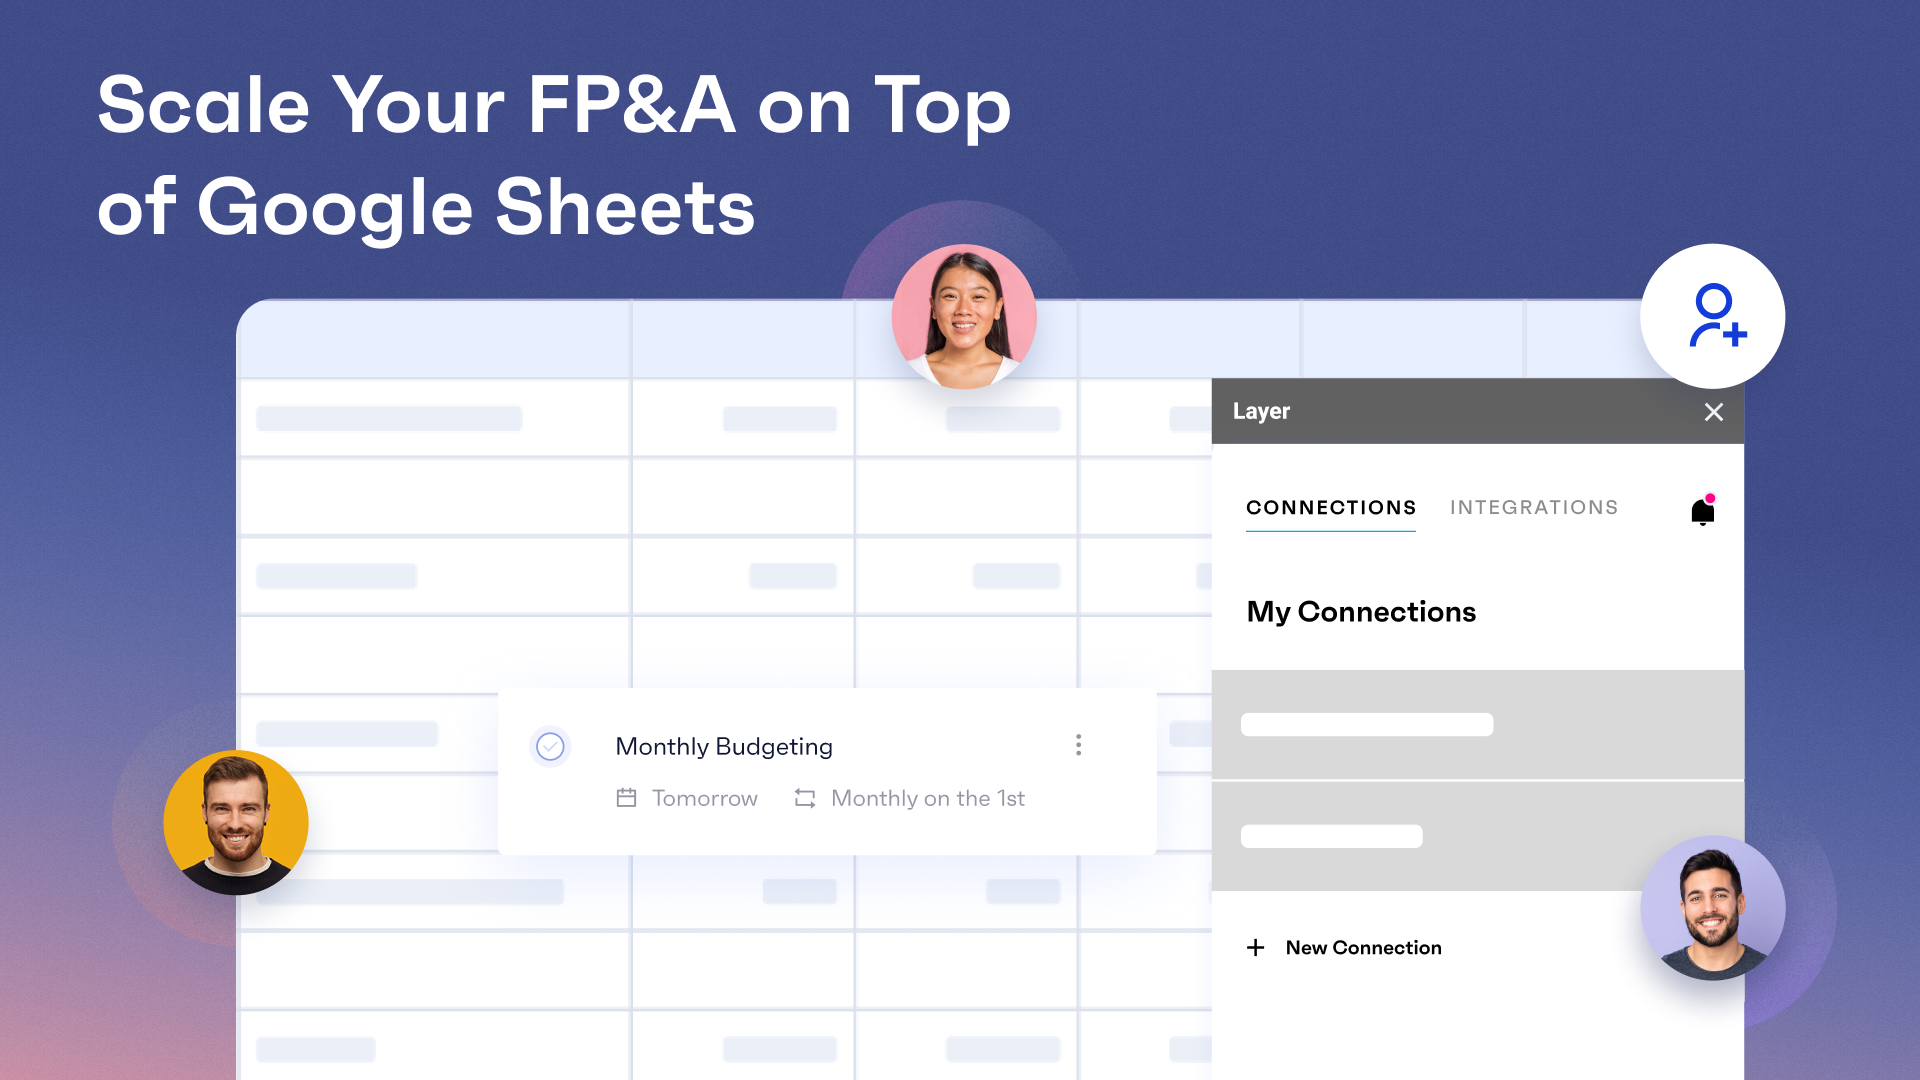 Manage, automate, and scale your FP&A processes on top of Google Sheets.